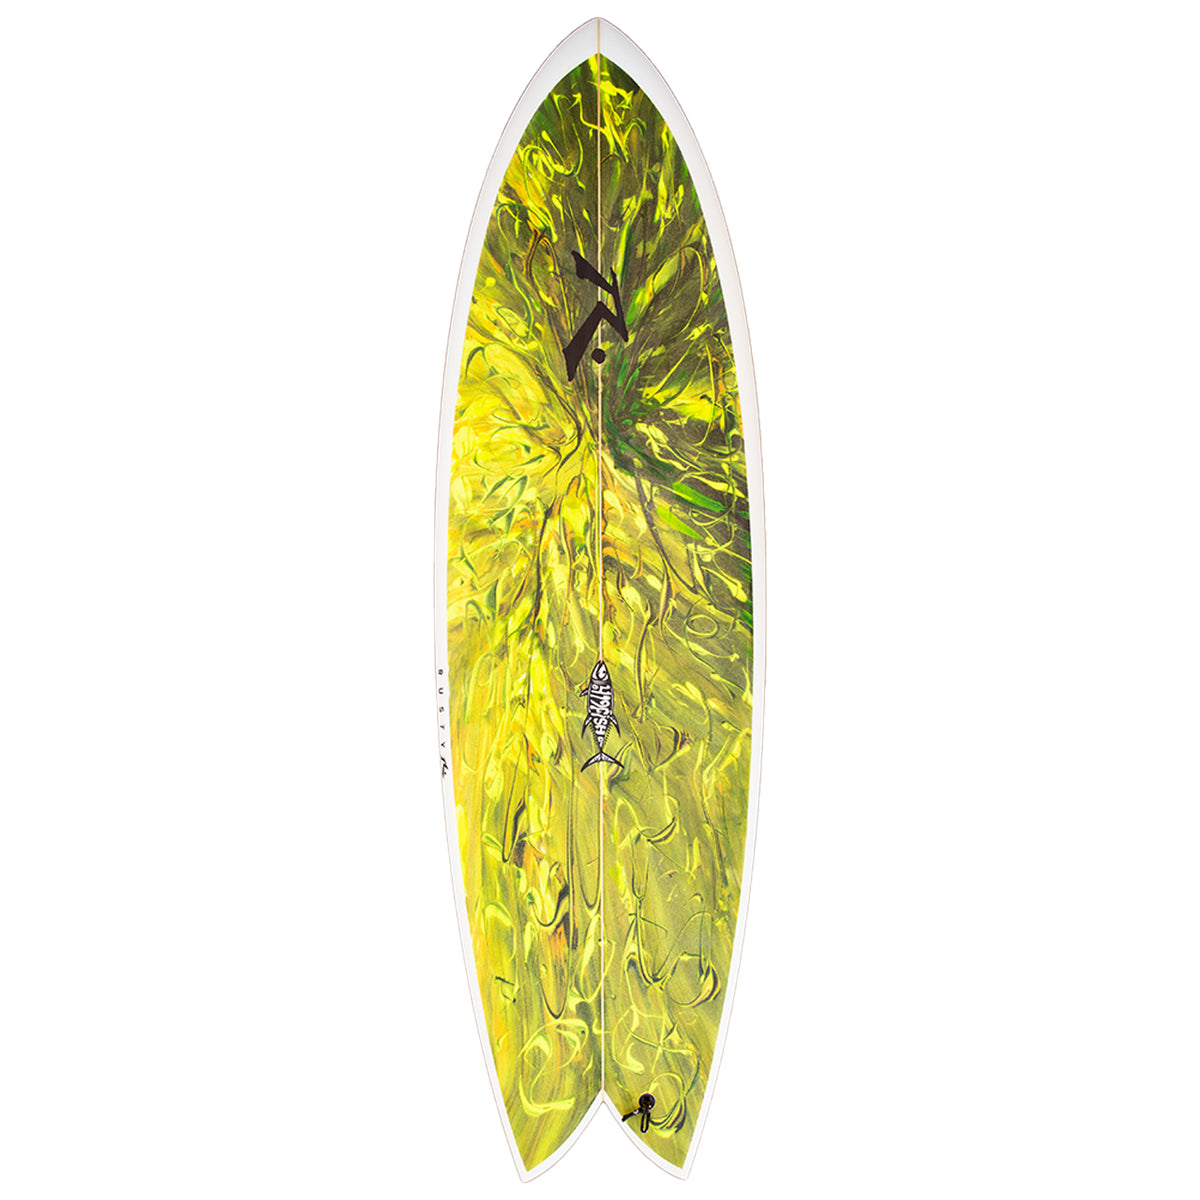 419fish - Alternative - Rusty Surfboards - Top View - Gold